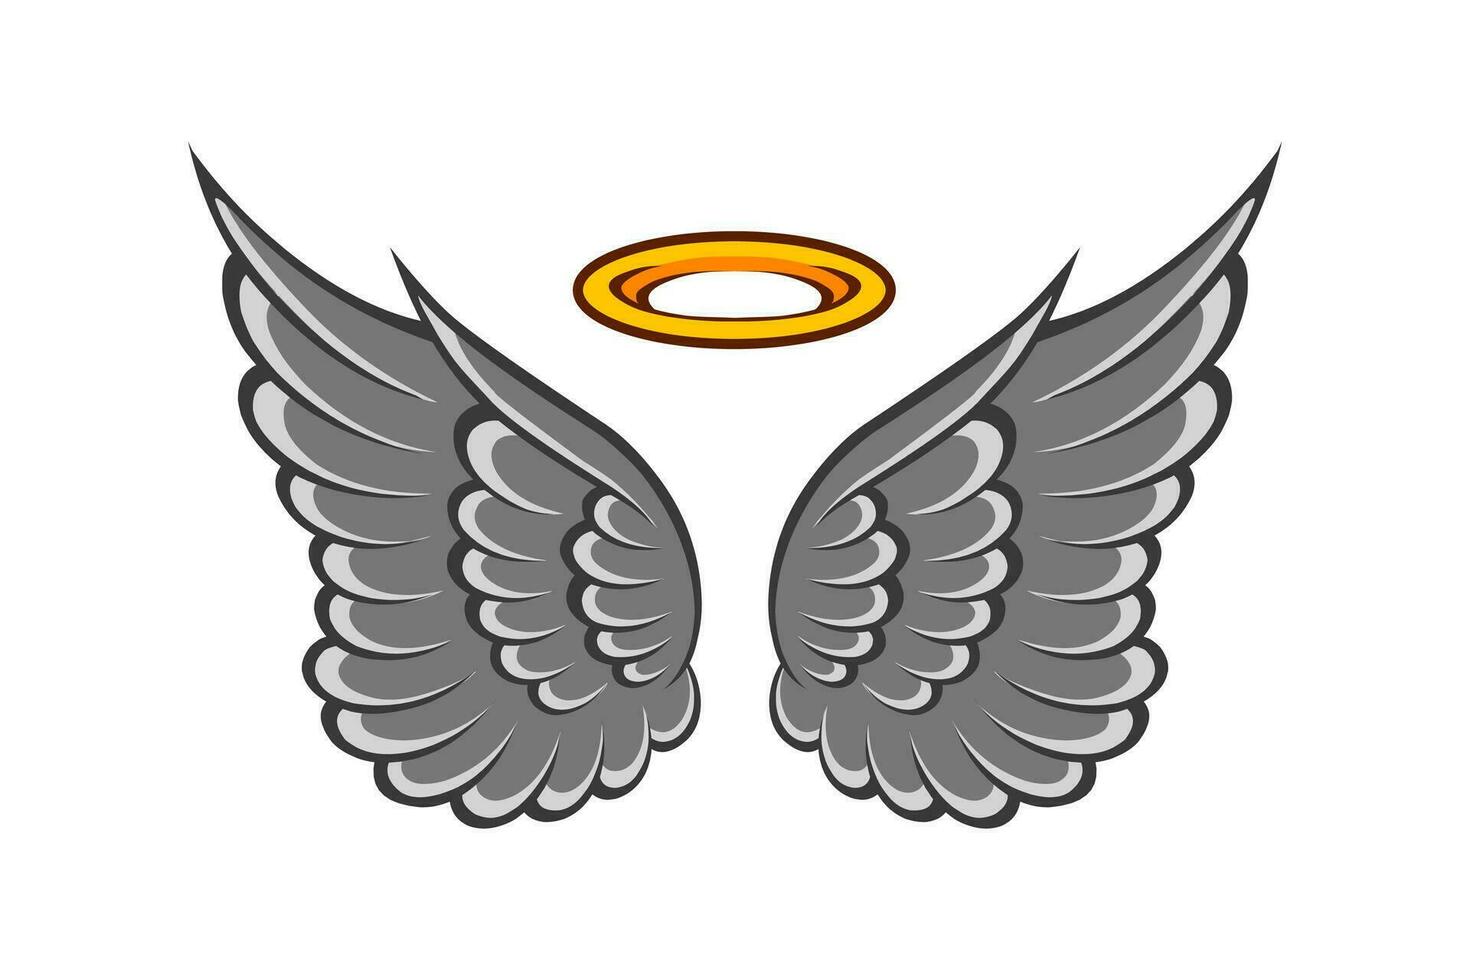 Vector cute angel wings with gold ring